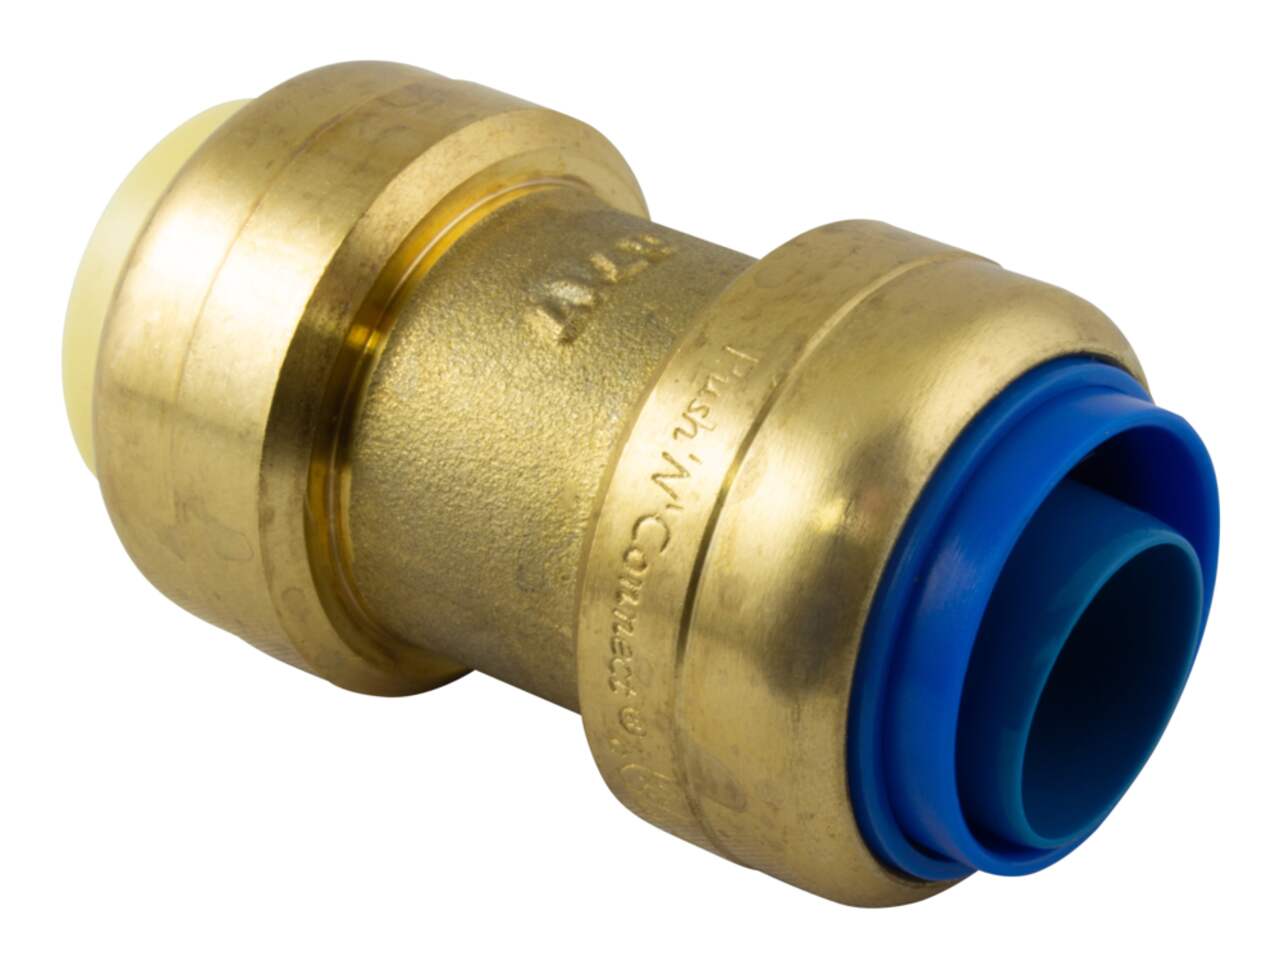 https://media-www.canadiantire.ca/product/fixing/plumbing/rough-plumbing/0632559/waterline-push-n-connect-poly-butylene-coupling-1-2--15543ecd-93a8-4bbf-958e-75f7ee76c8e6.png?imdensity=1&imwidth=640&impolicy=mZoom